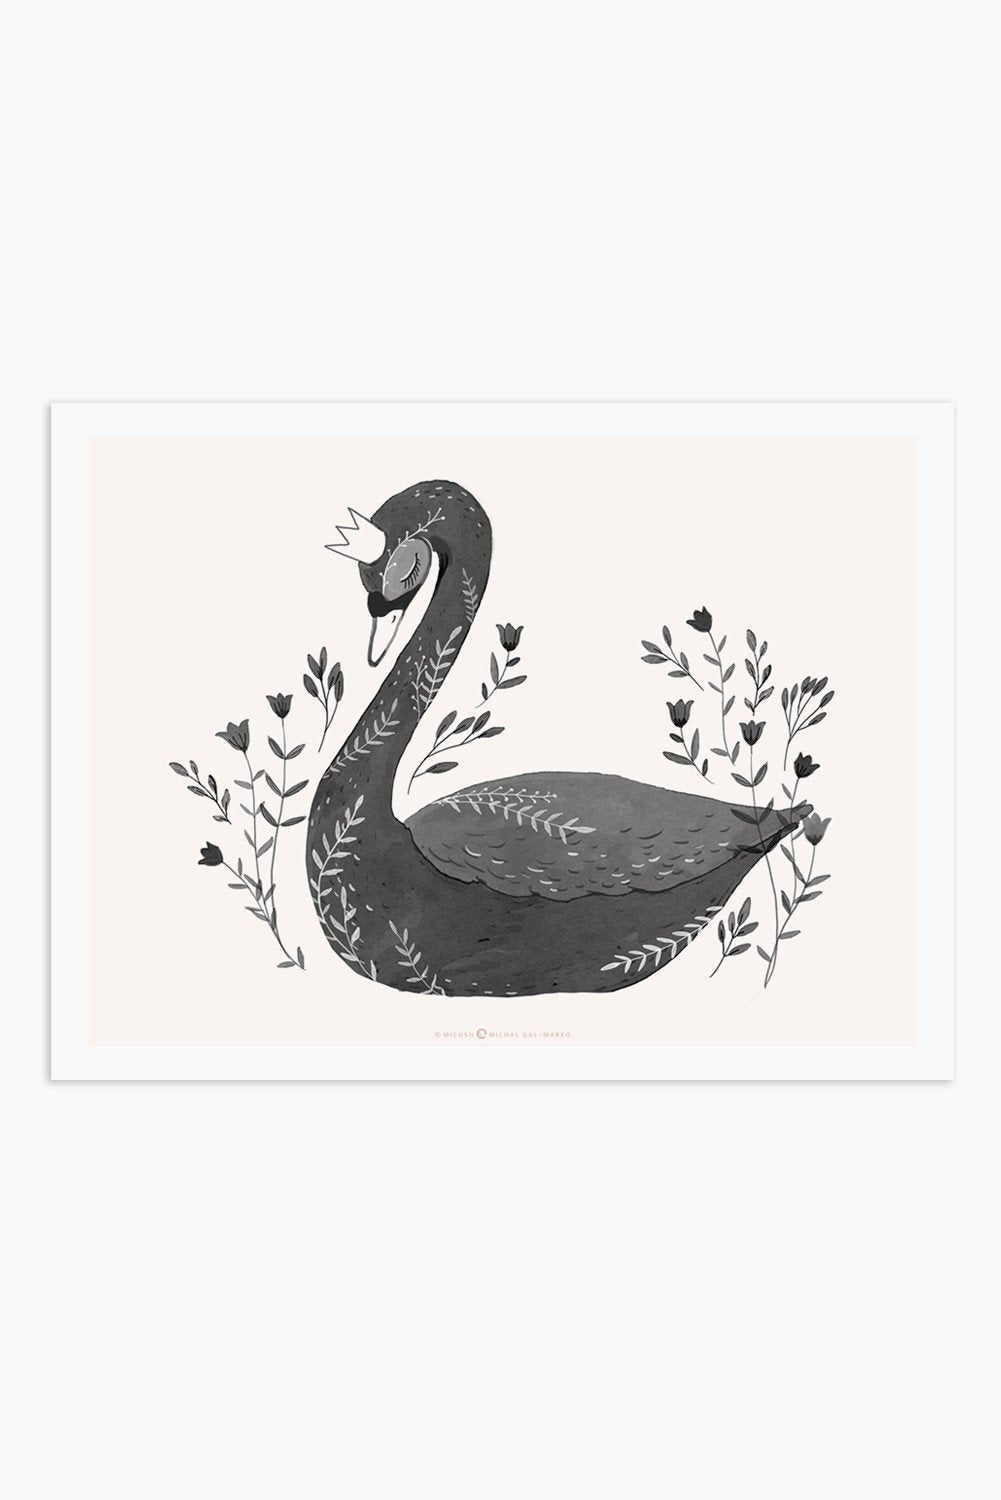 Art Print - Black Swan - Only available in Israel